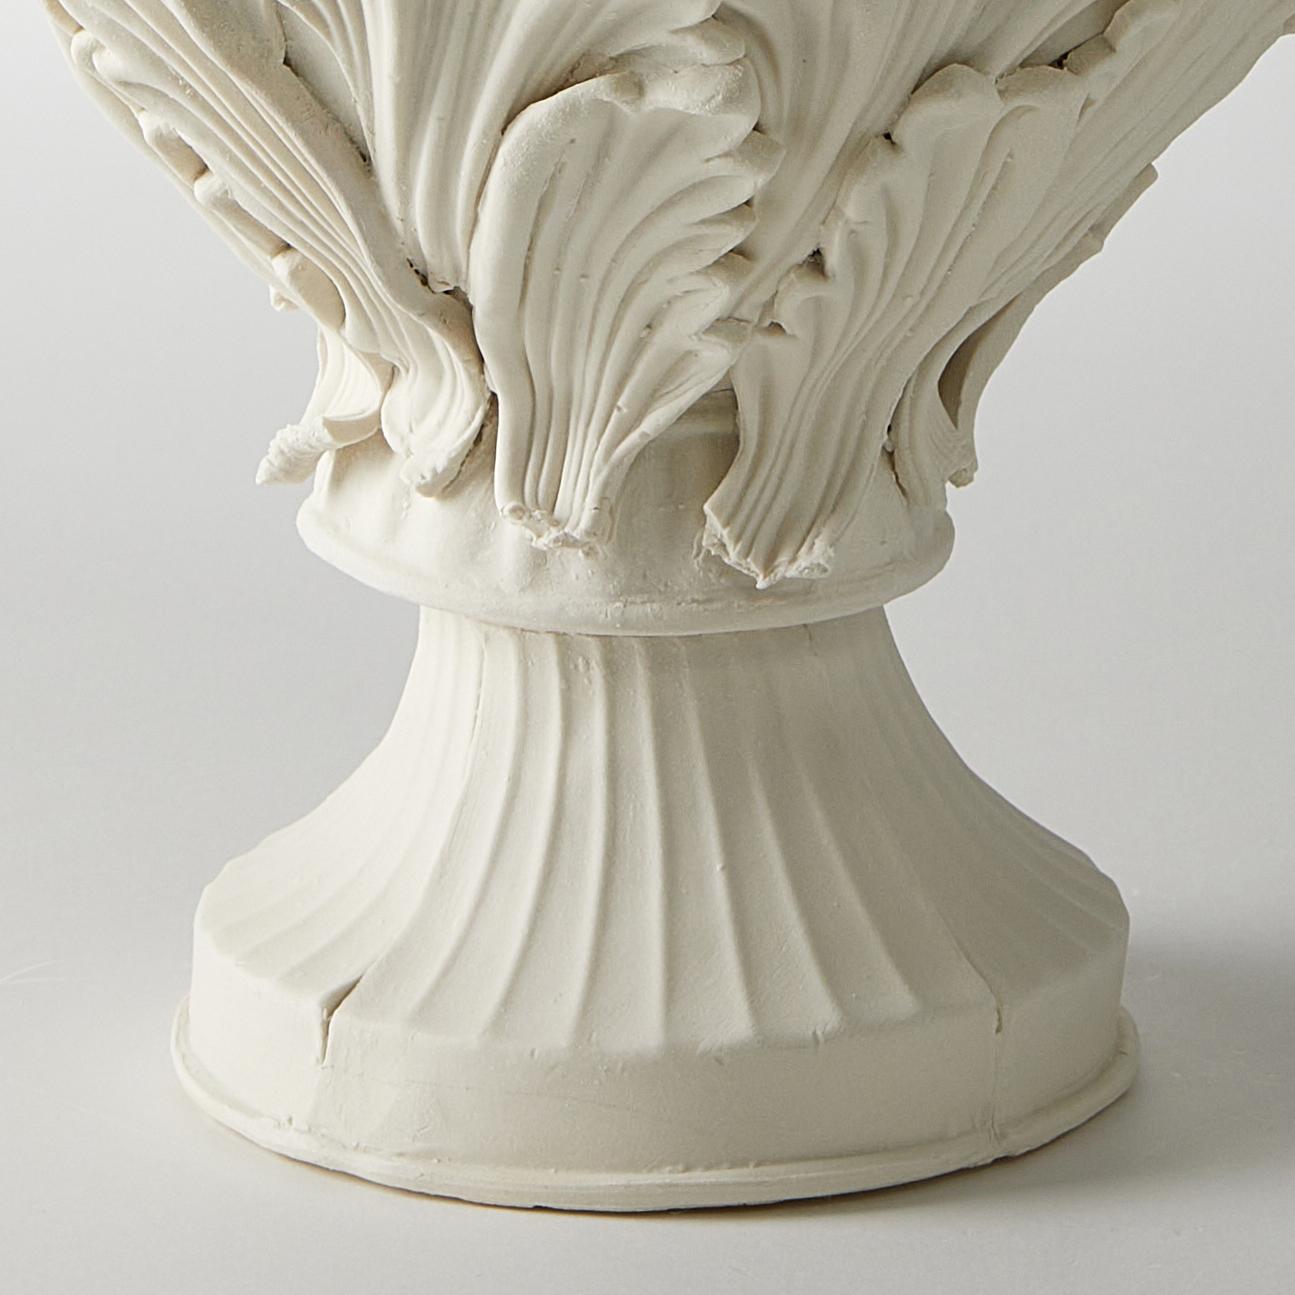 British Acanthus I, a Unique Handmade Porcelain Vase with Leaf Decoration by Amy Hughes For Sale